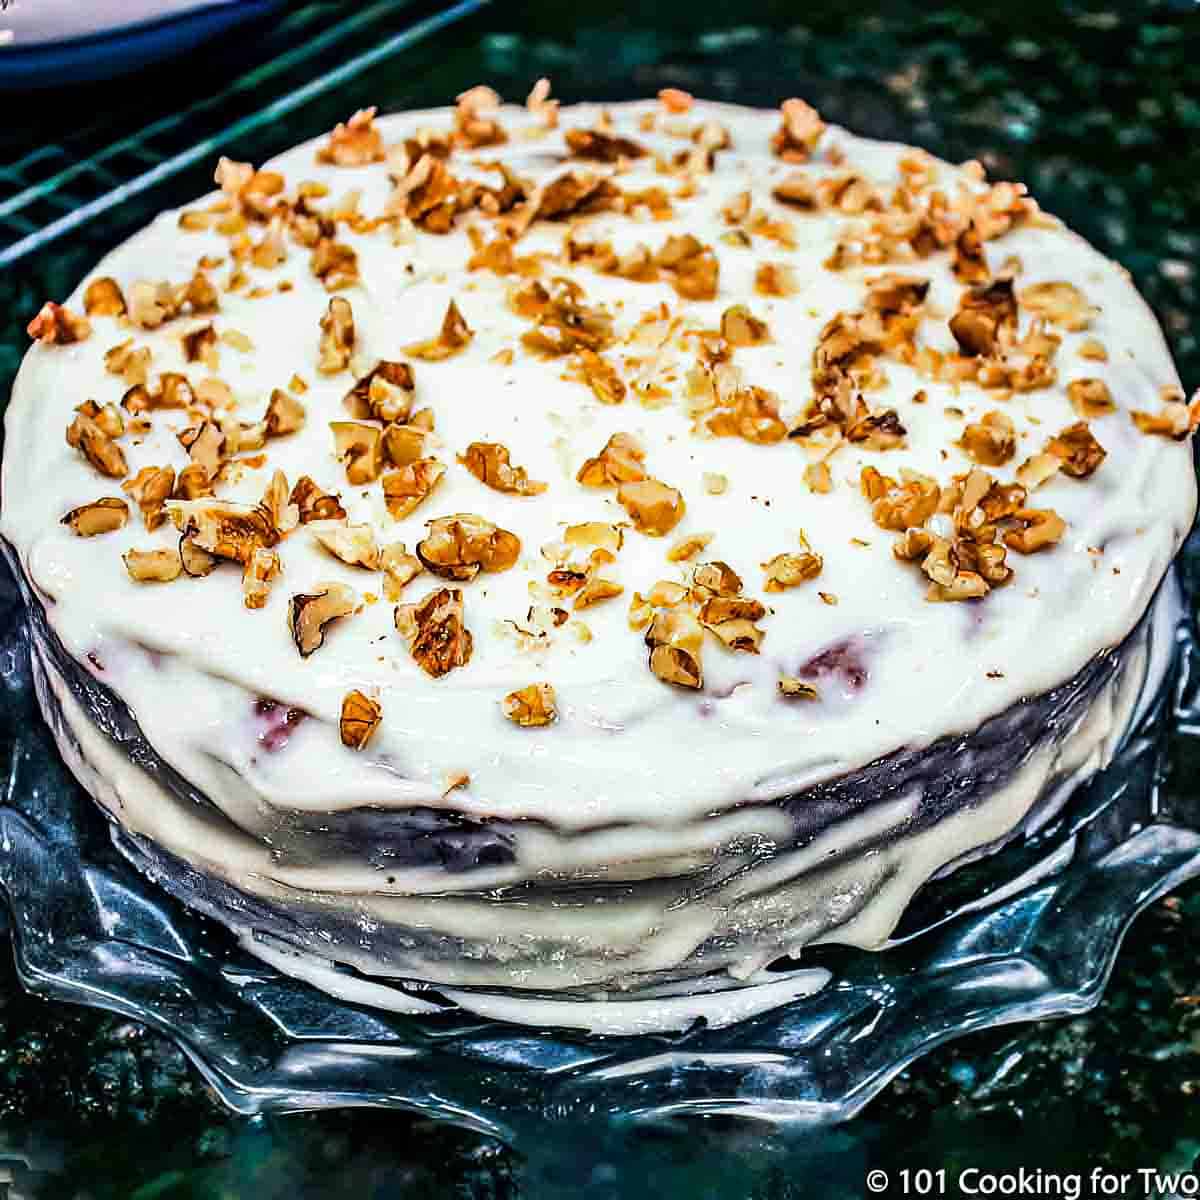 .whole llayered carrot cake with nuts.